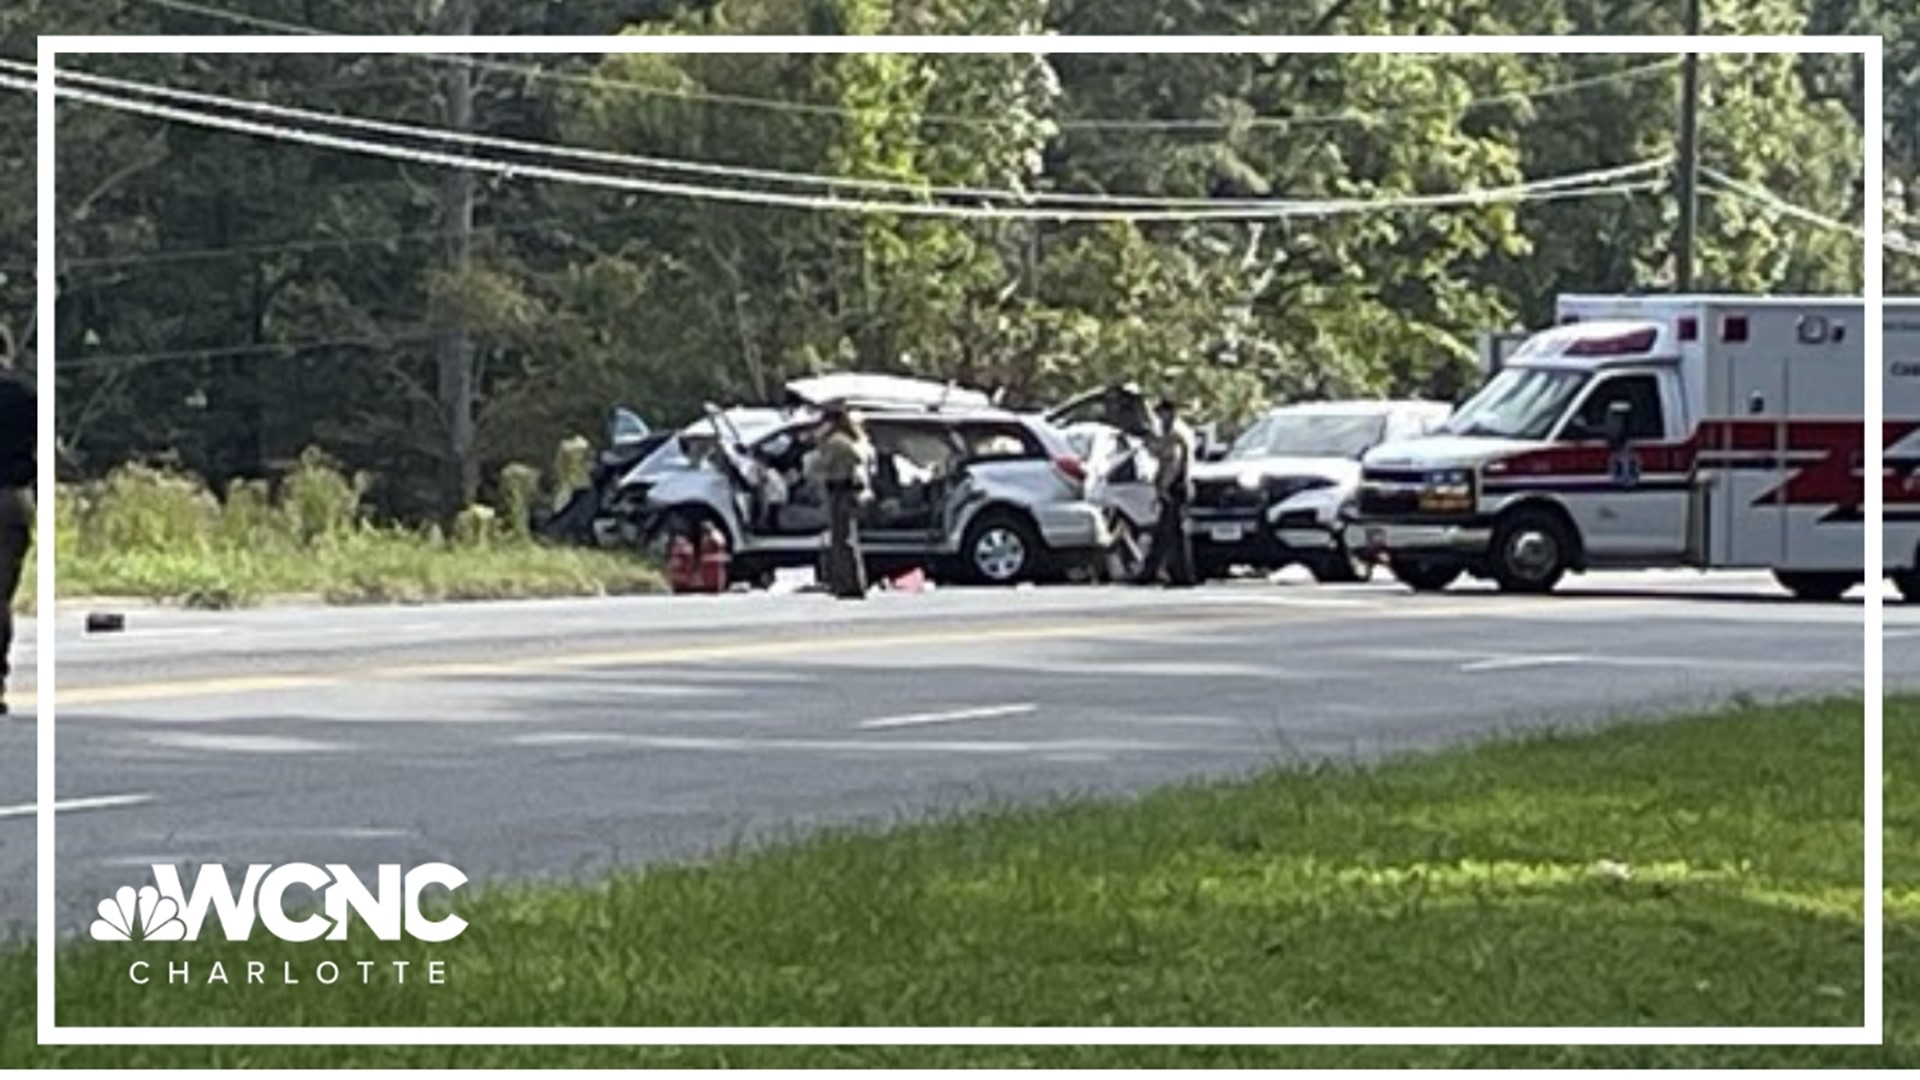 Multiple people were killed and at least one other person was airlifted from the scene of a crash on North Carolina 24/27 in Midland, deputies confirmed.